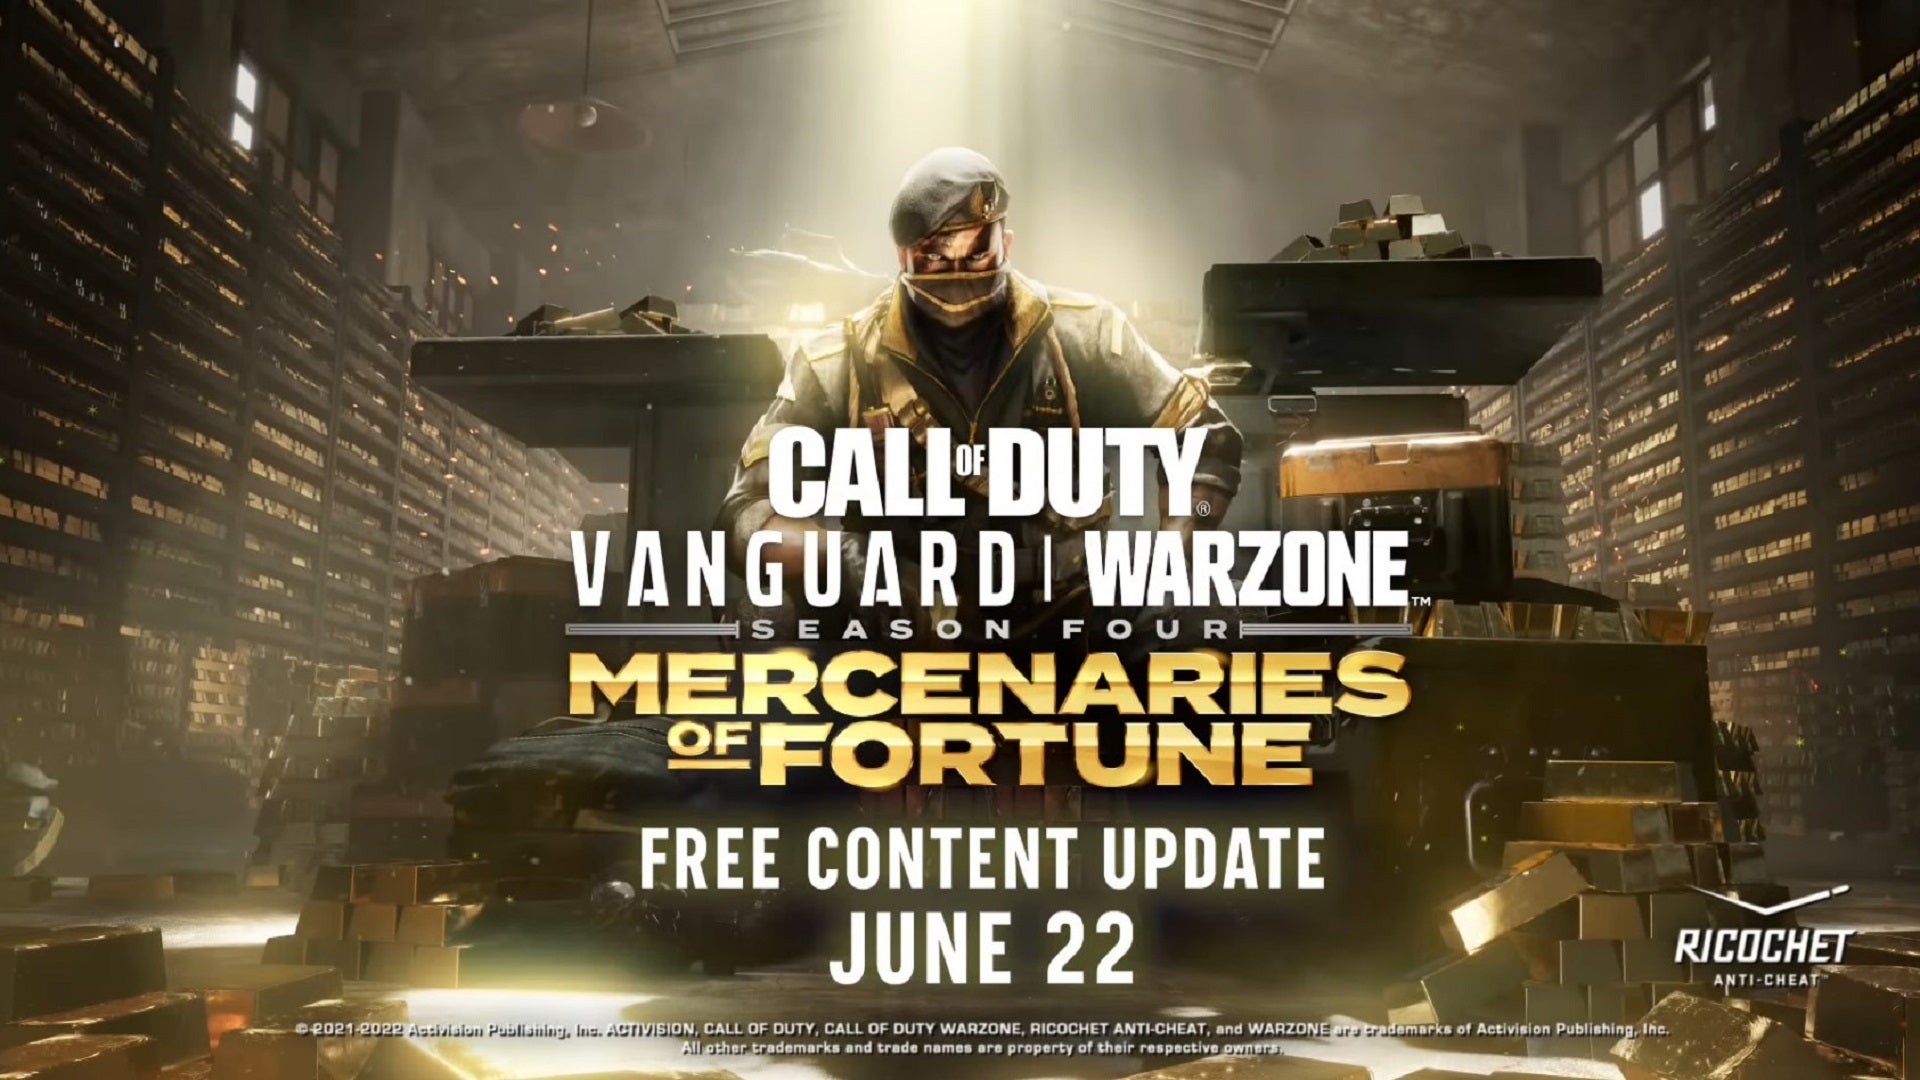 Header image for Warzone season 4 (taken from official cinematic trailer)